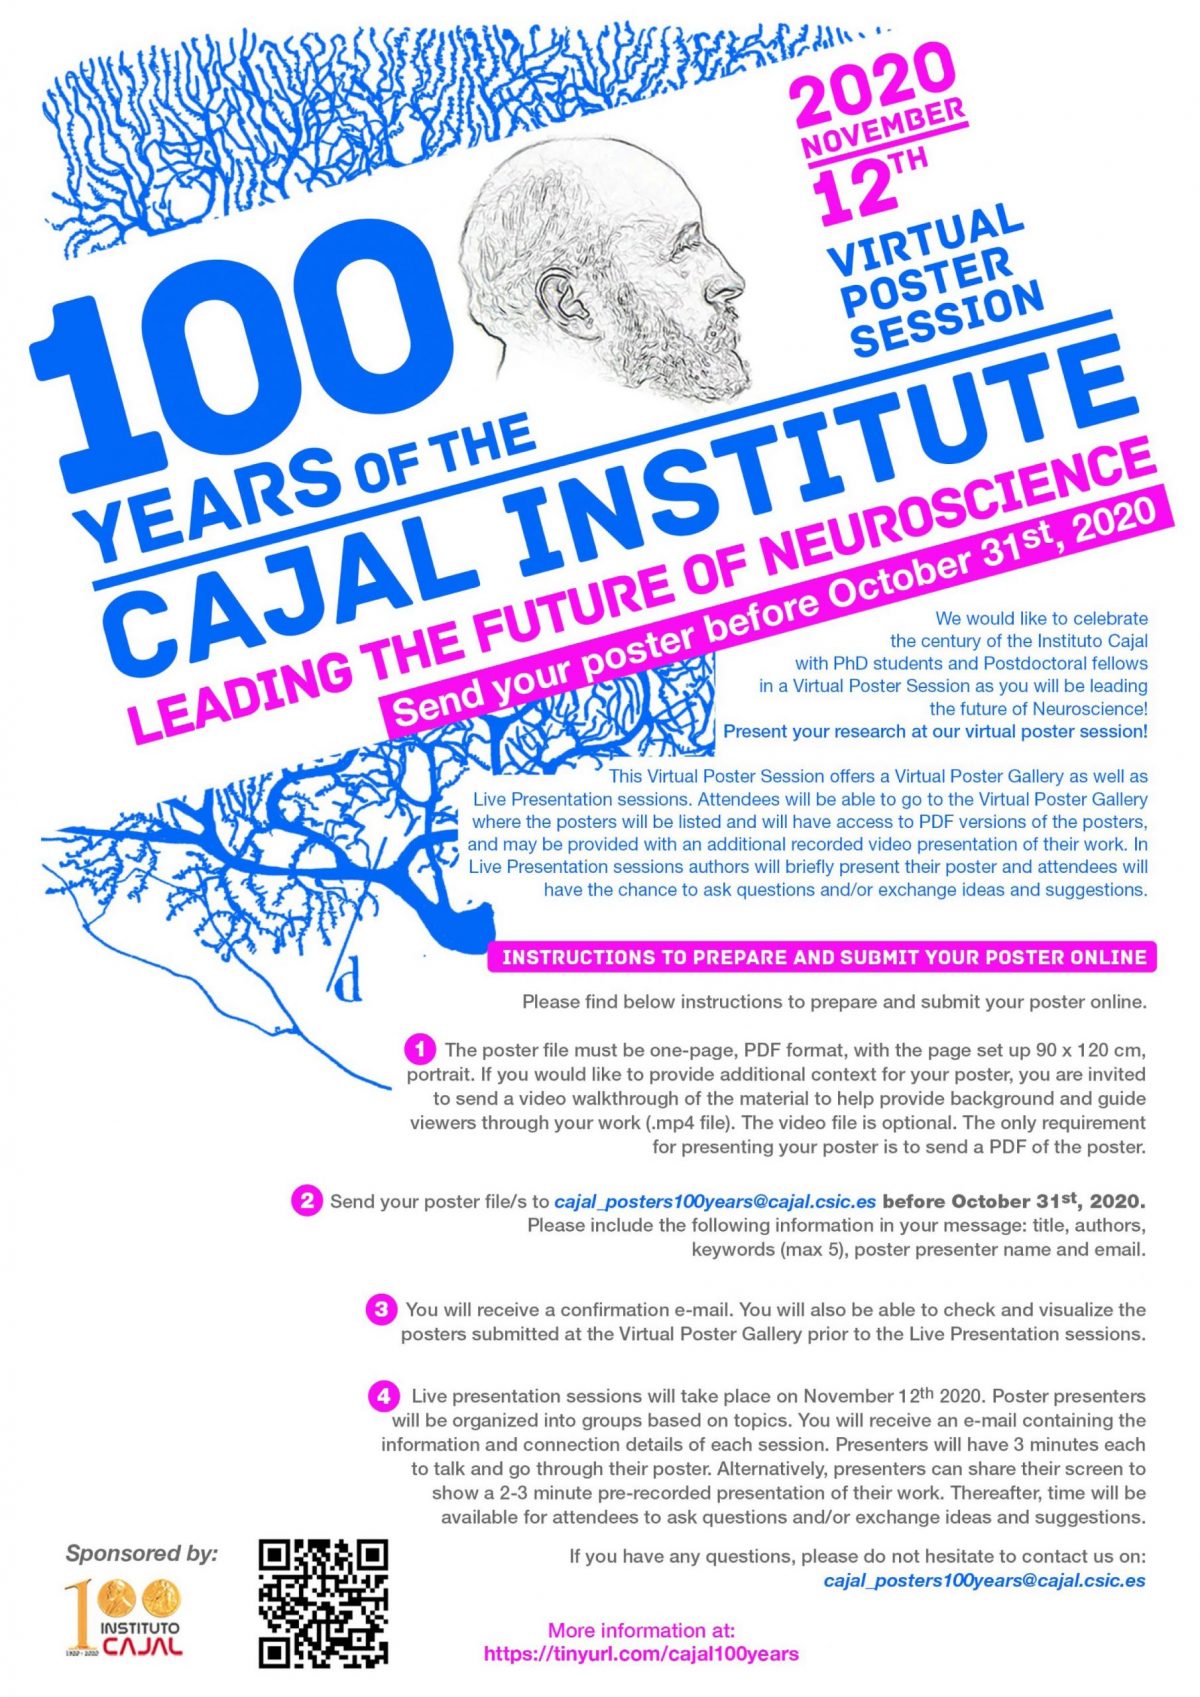 100 years of the Cajal Institute: Leading the Future of Neuroscience